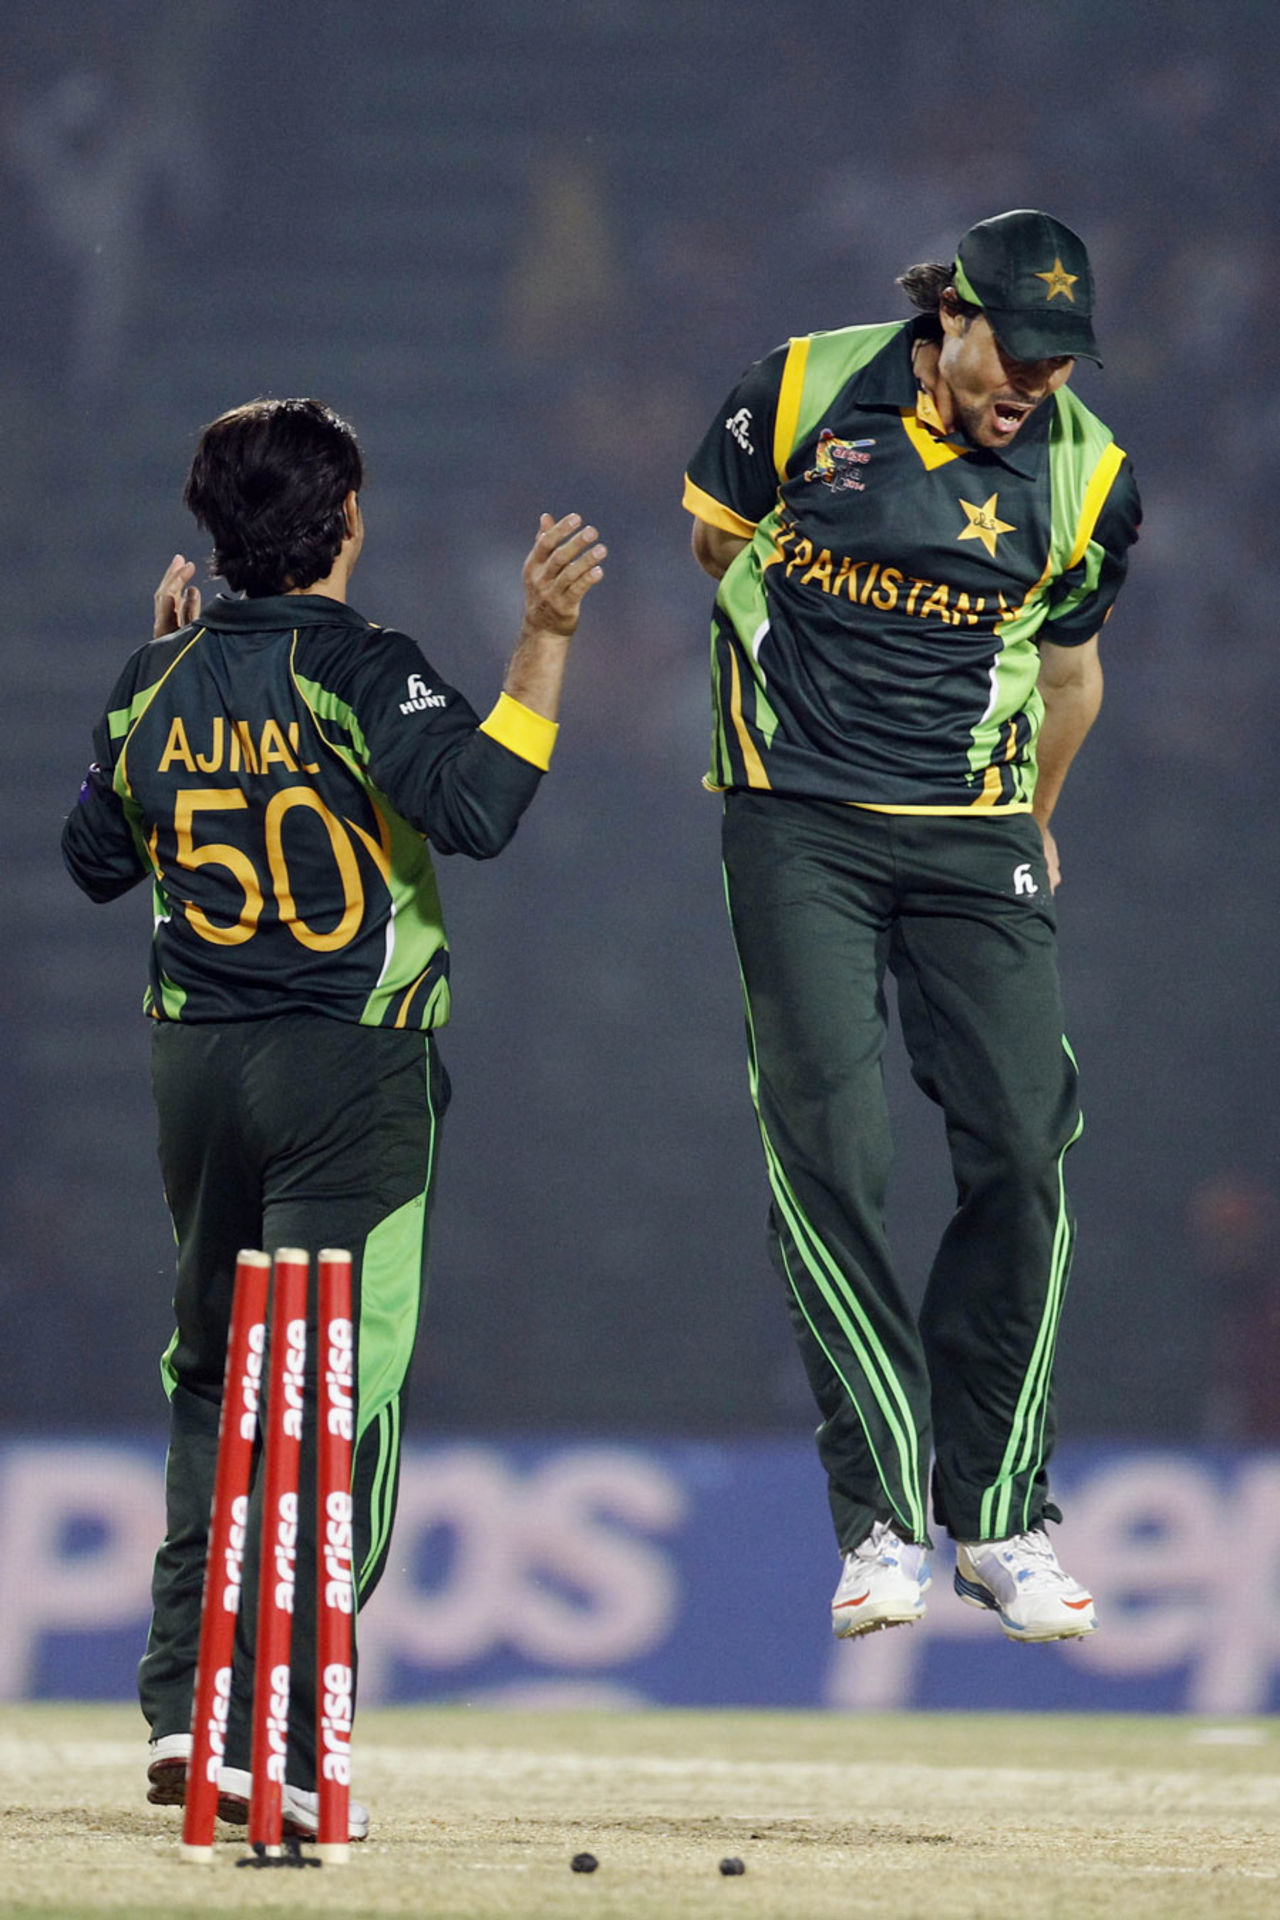 Saeed Ajmal and Anwar Ali exult after a wicket, Afghanistan v Pakistan, Asia Cup 2014, Fatullah, February 27, 2014